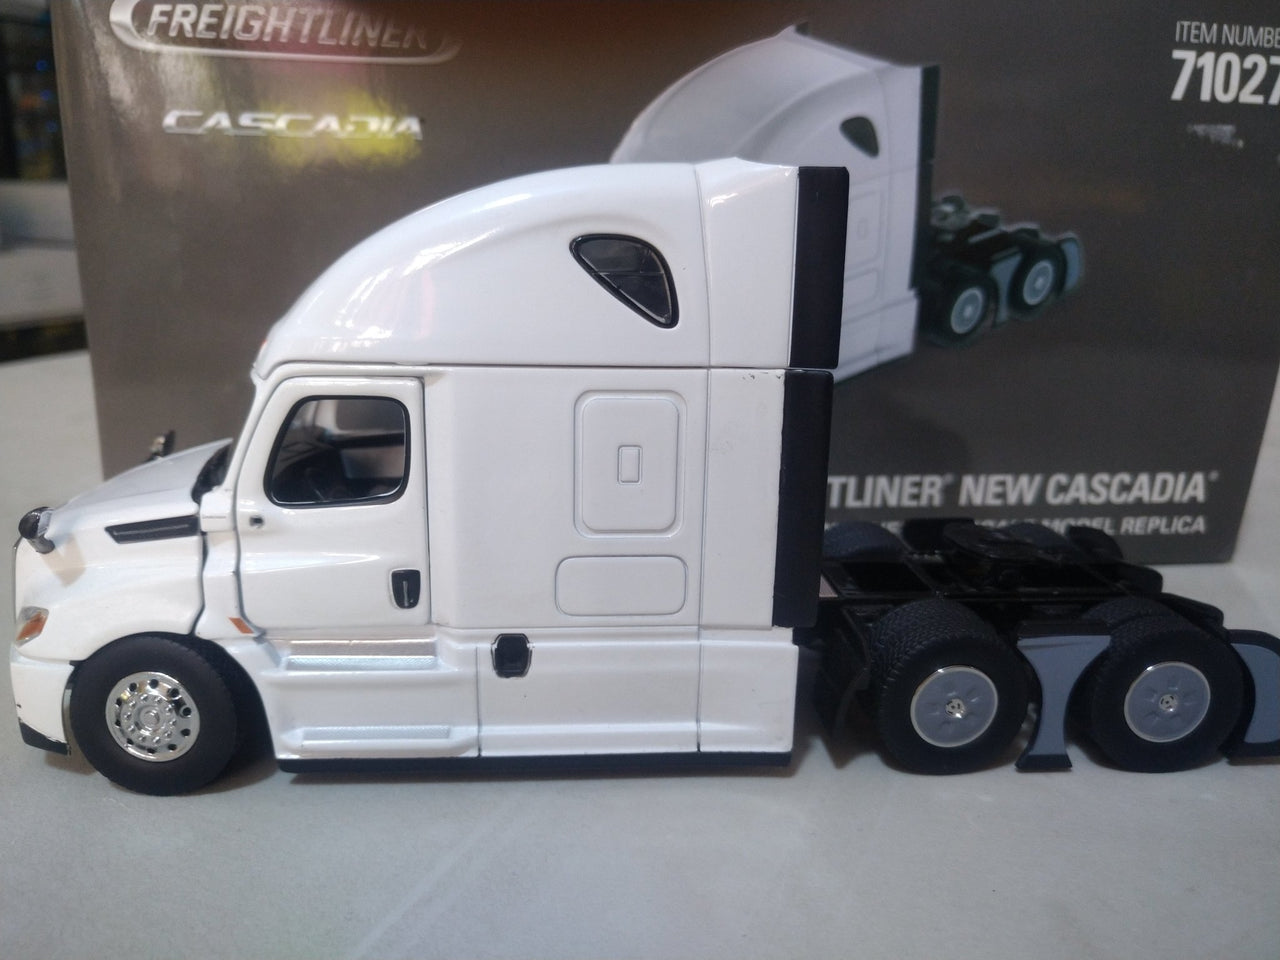 71027 Freightliner New Cascadia Tract 1:50 Scale (Discontinued Model)